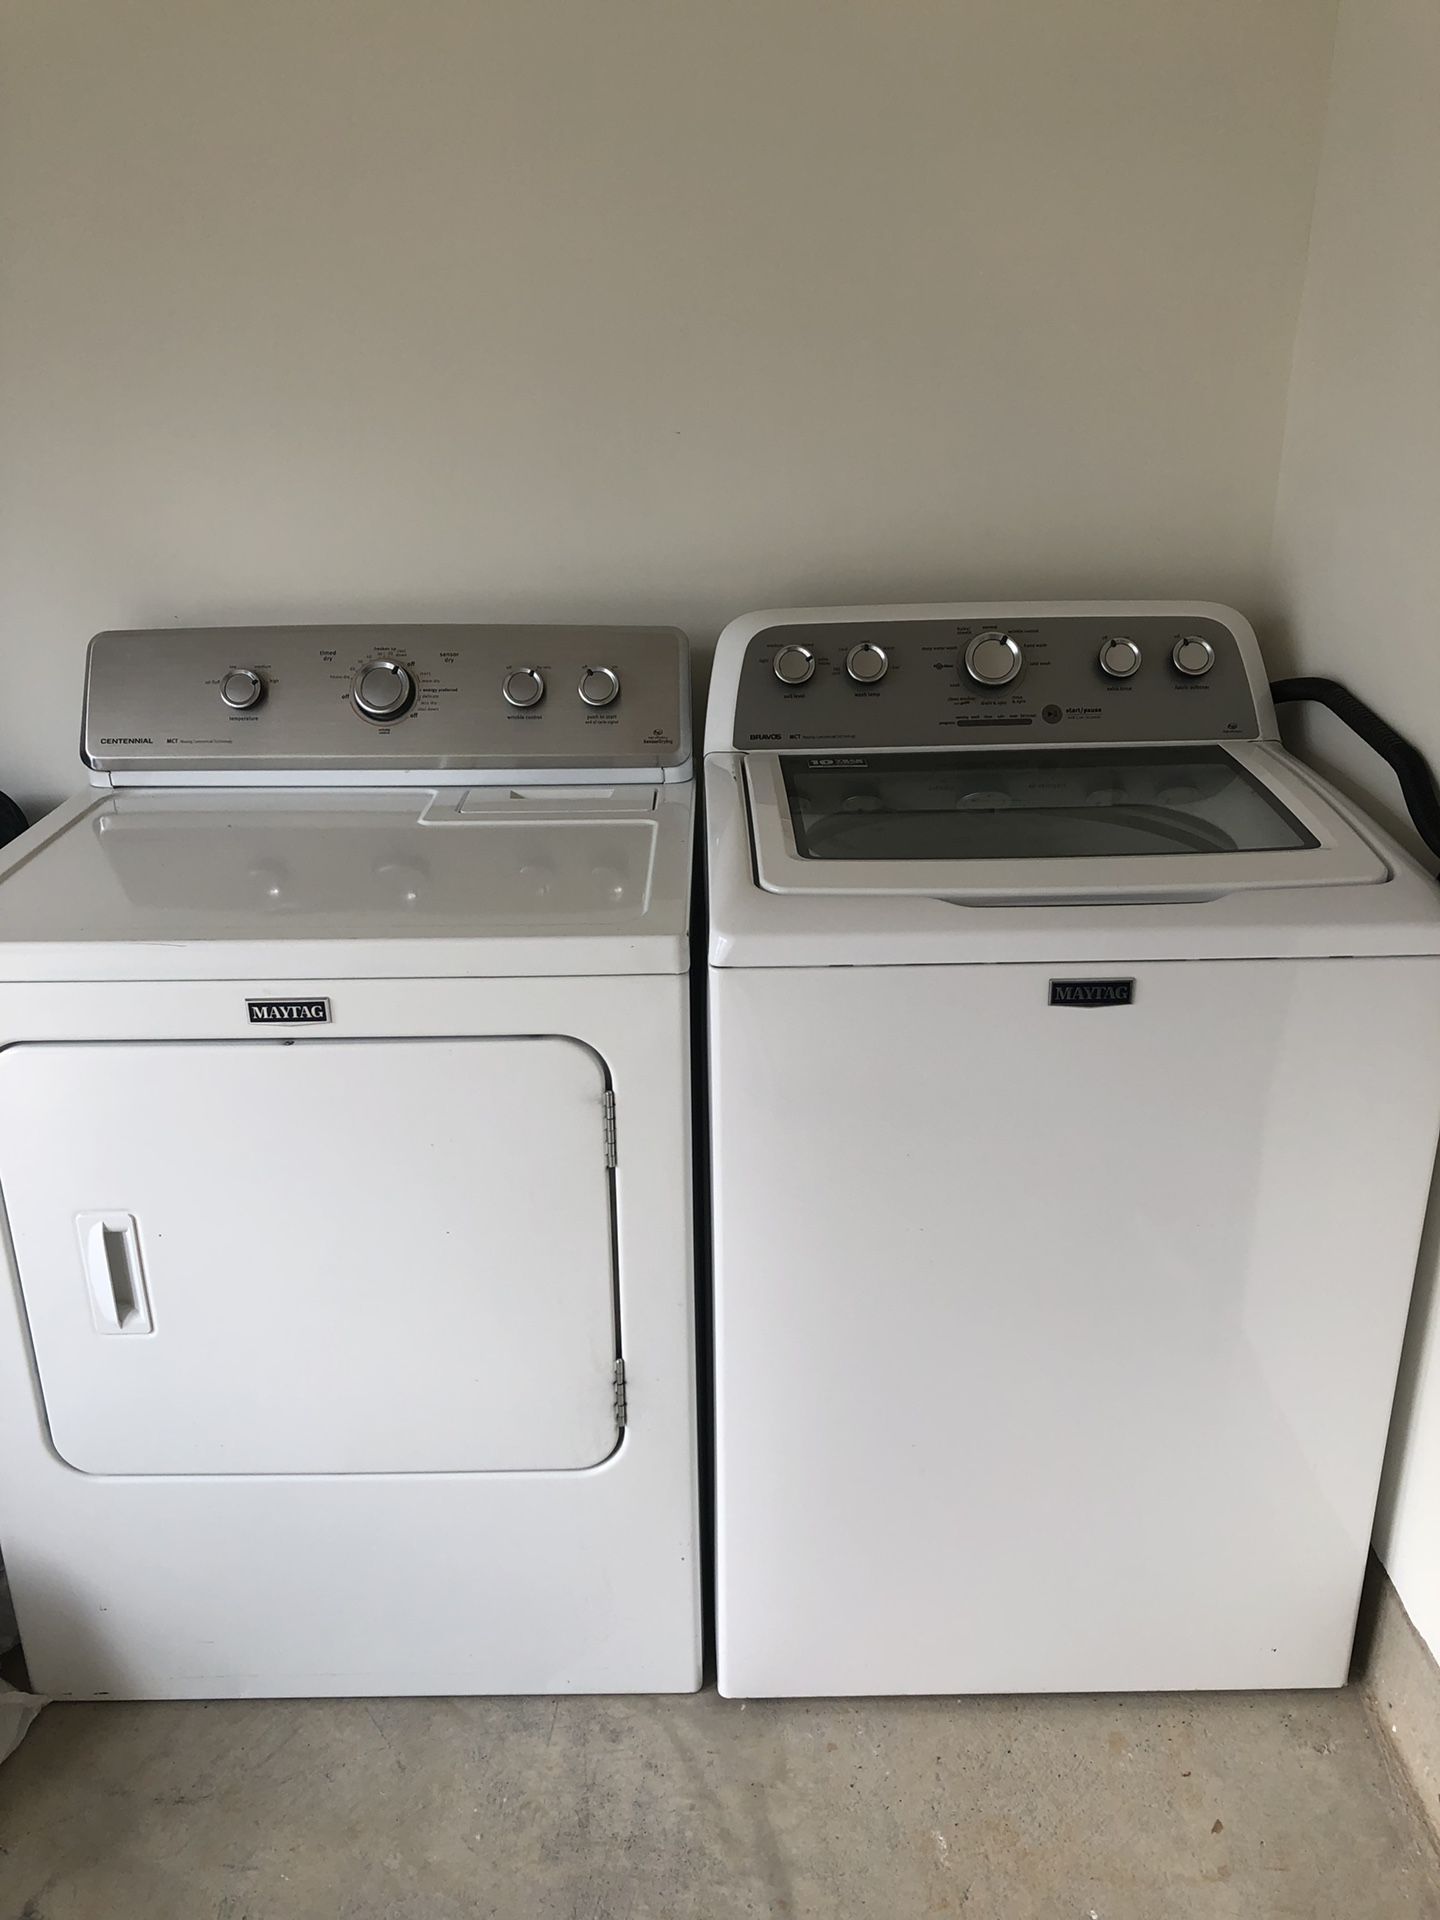 Maytag HE washer & dryer set fits king comforters & larger loads comfortably, dryer very hot. Works excellent!!!